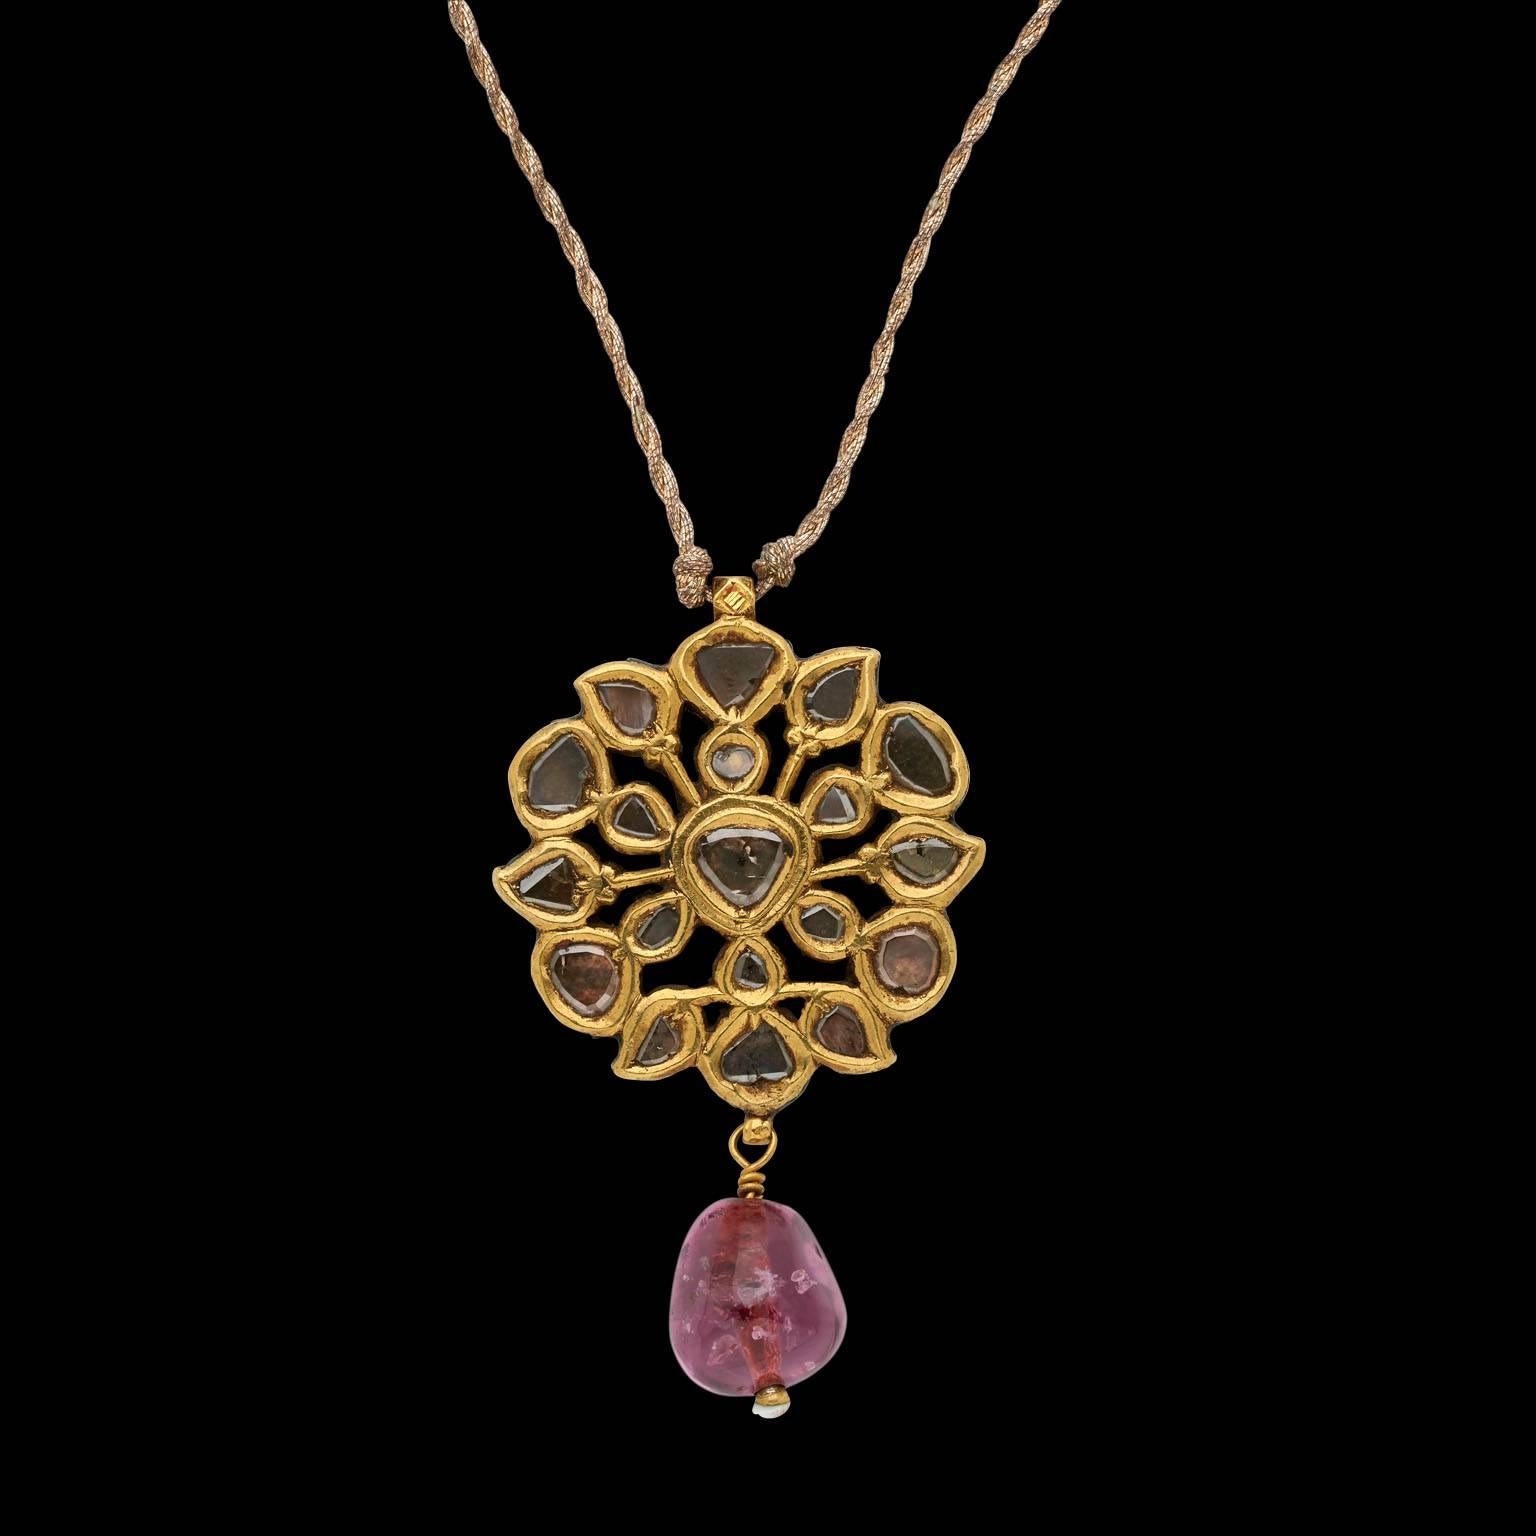 Antique Indian Pendant in Gold with Diamonds and Spinel For Sale at 1stDibs